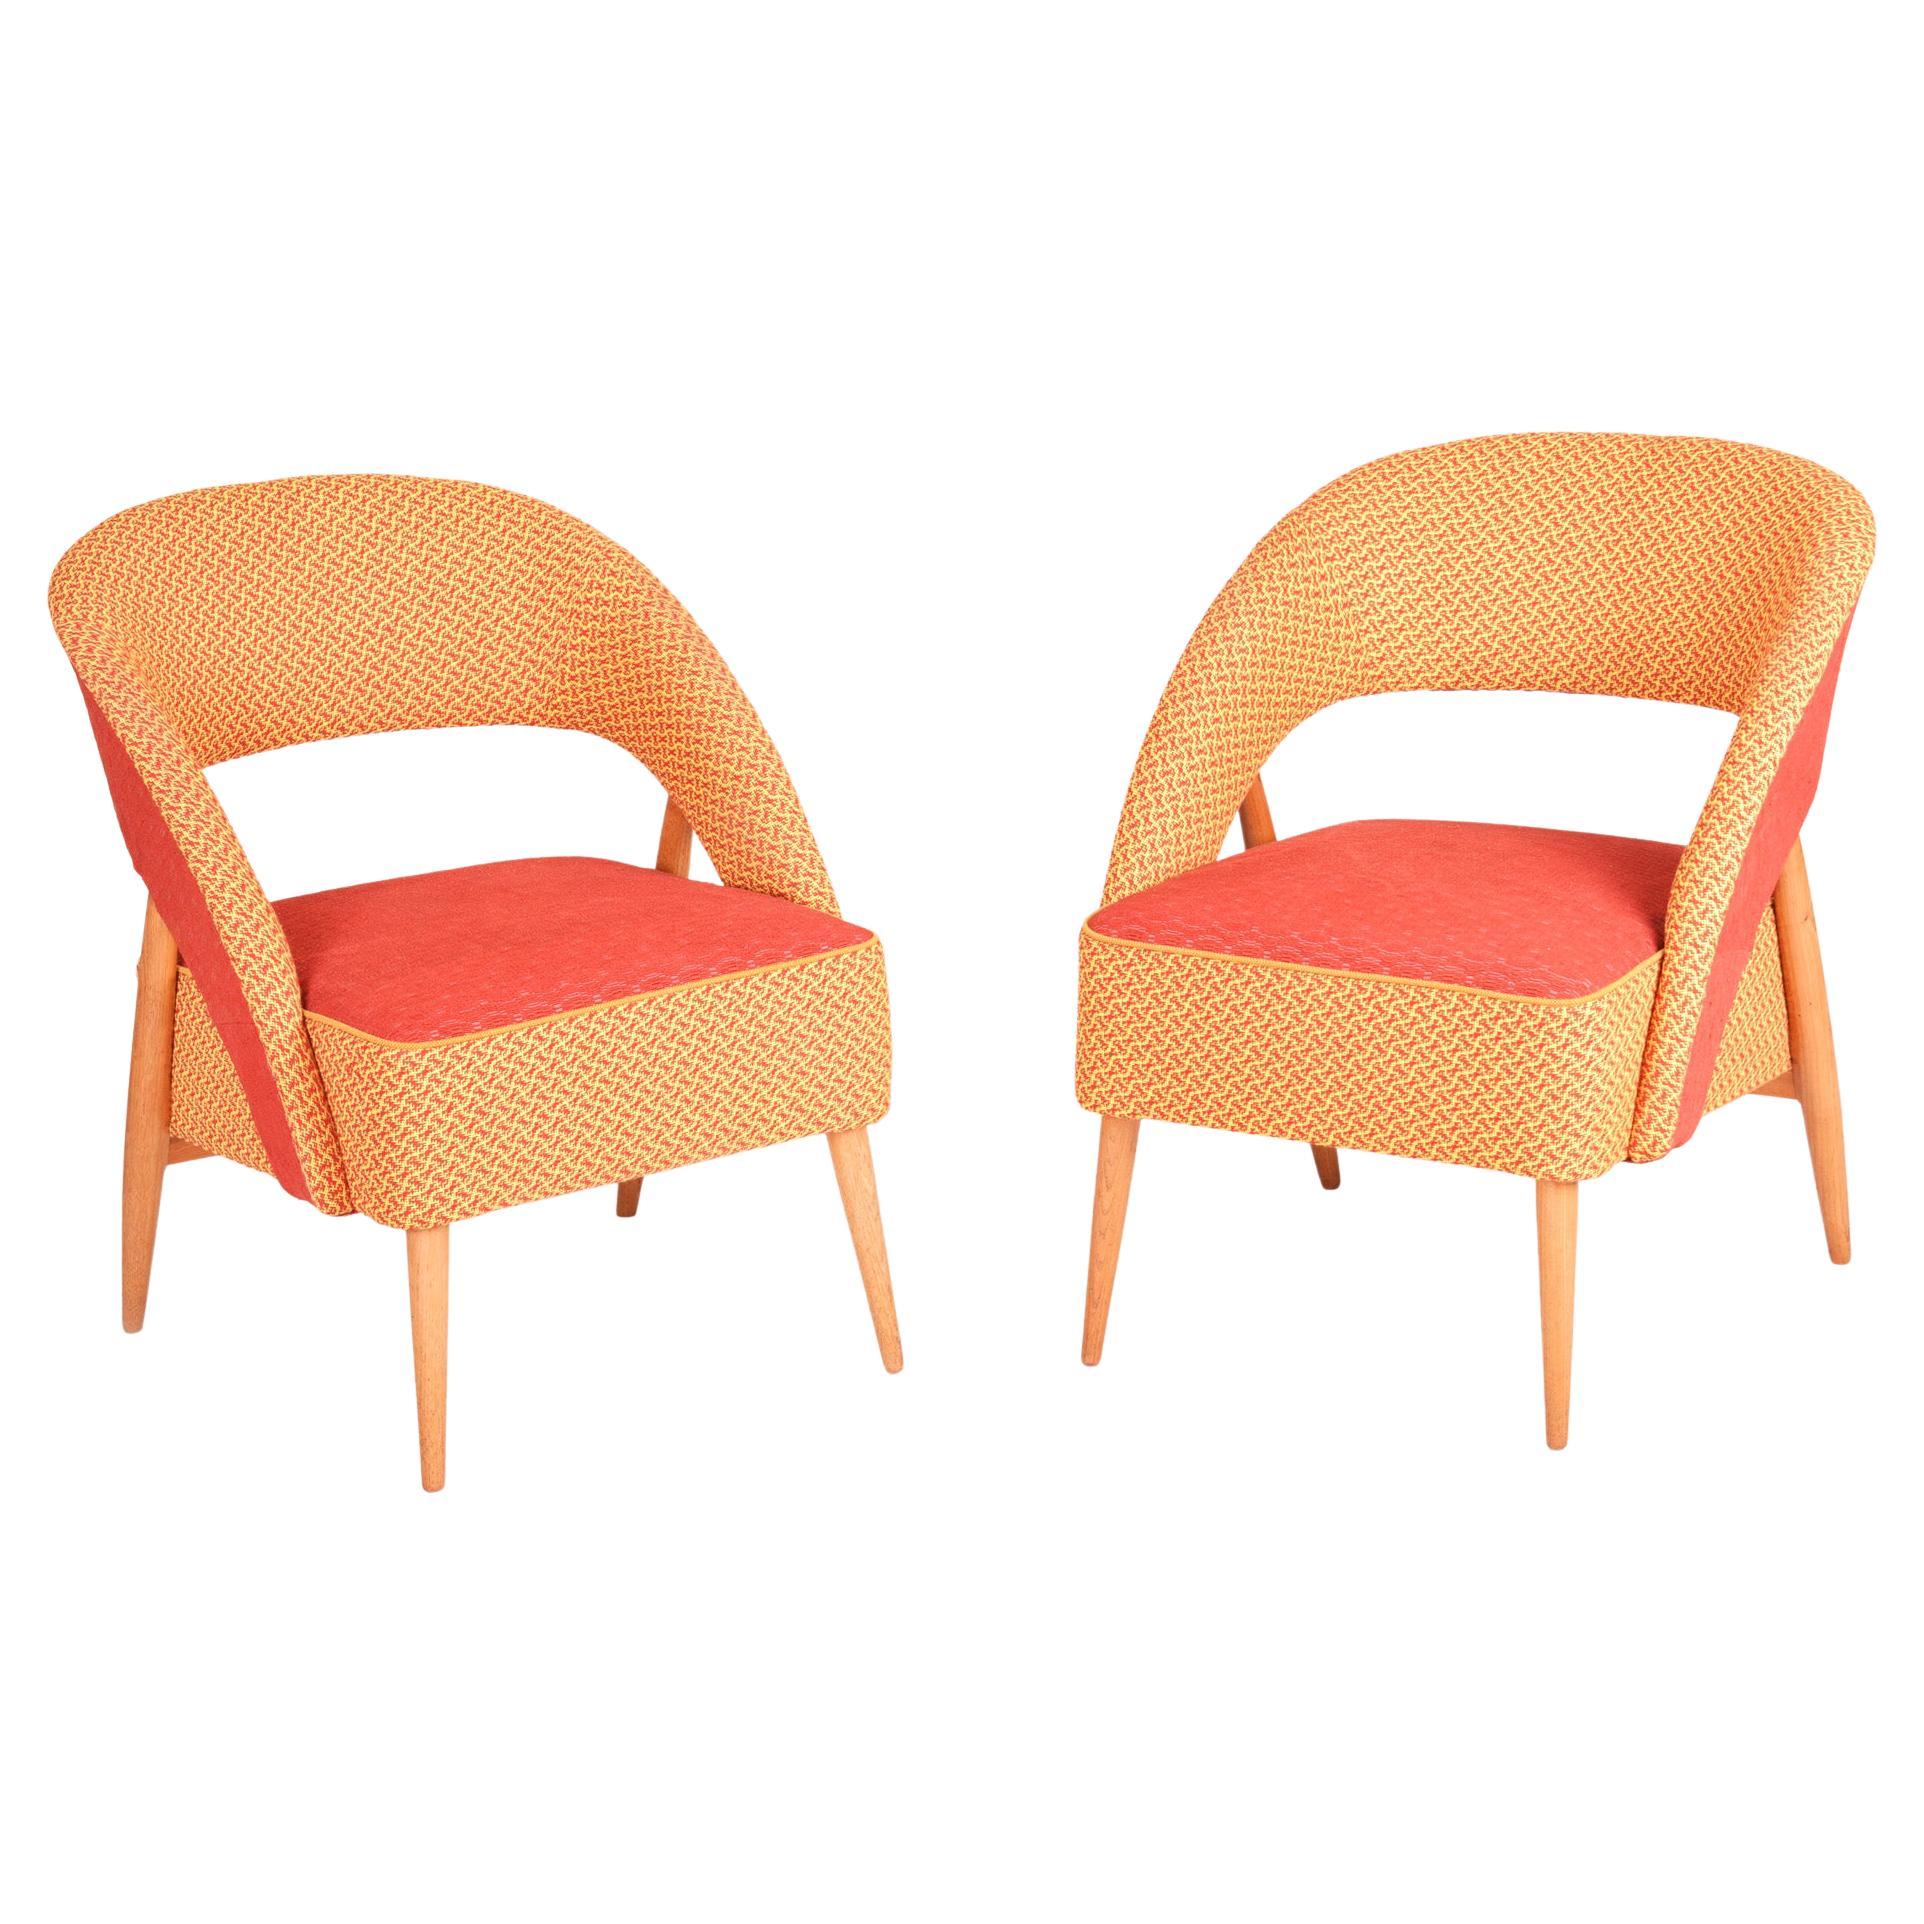 Mid Century Red and Orange Chairs, Made in 1940s, Czechia, Restored by Our Team For Sale